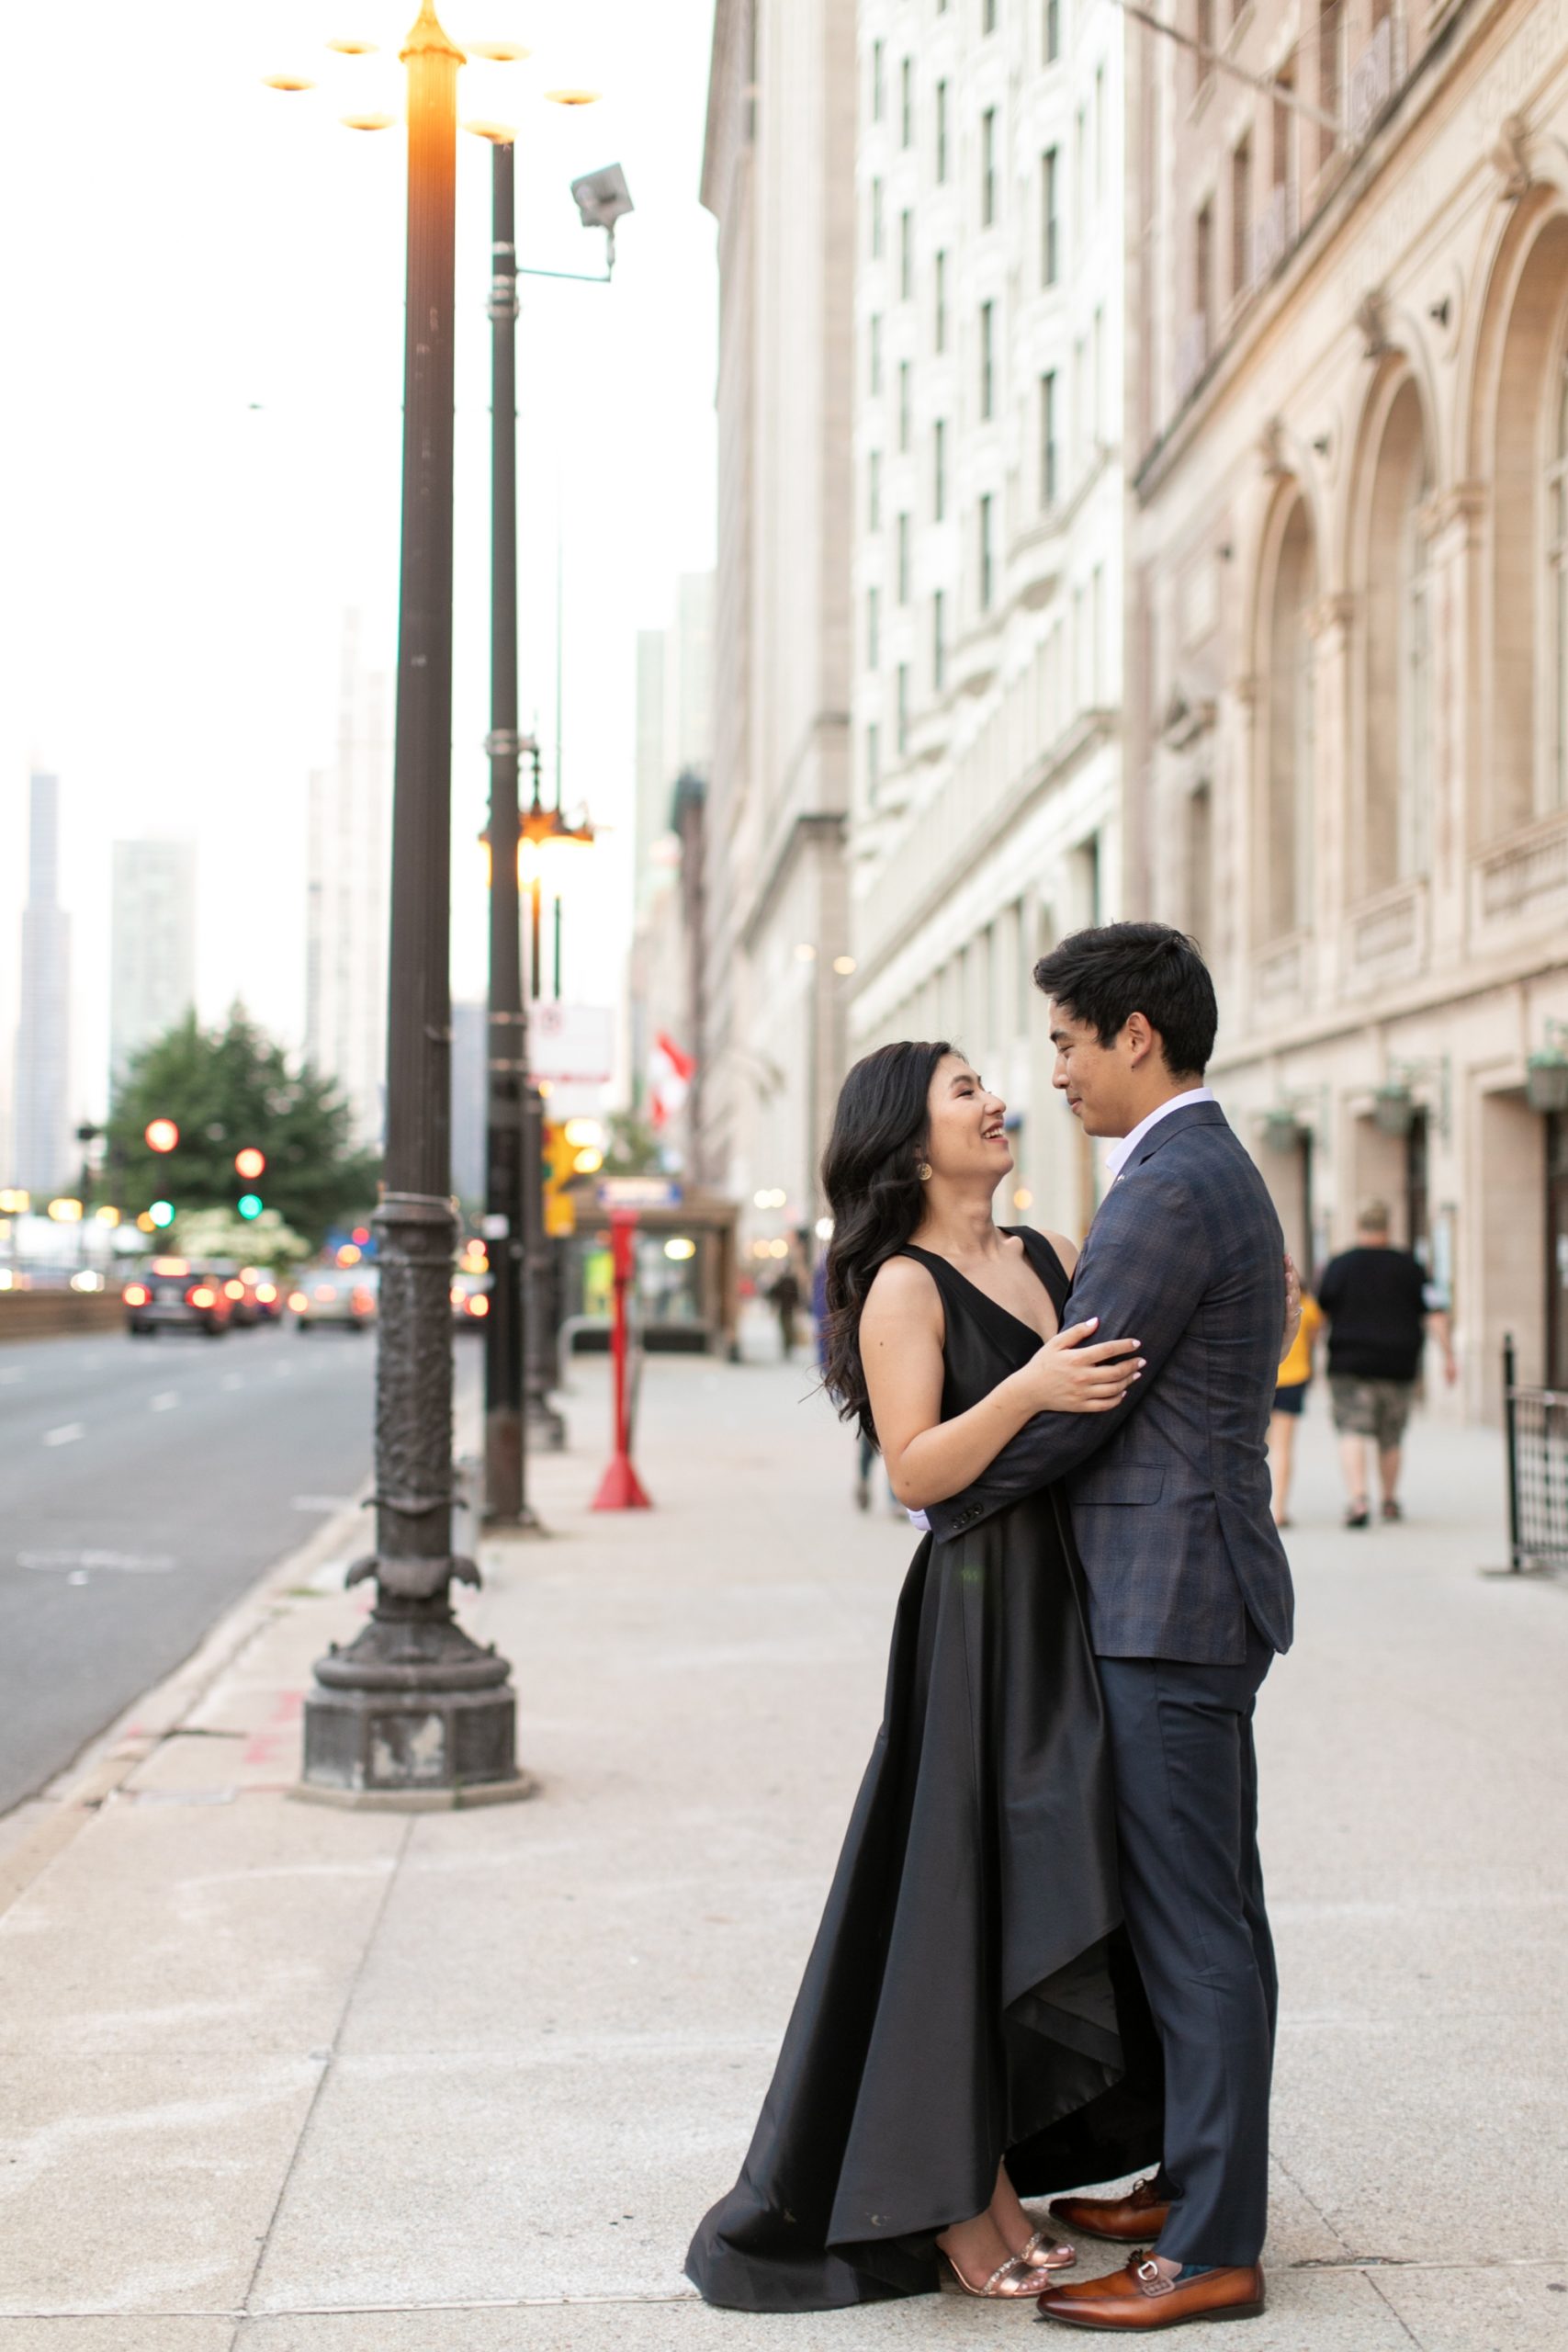 The couple laughed during their downtown Chicago engagement photo shoot